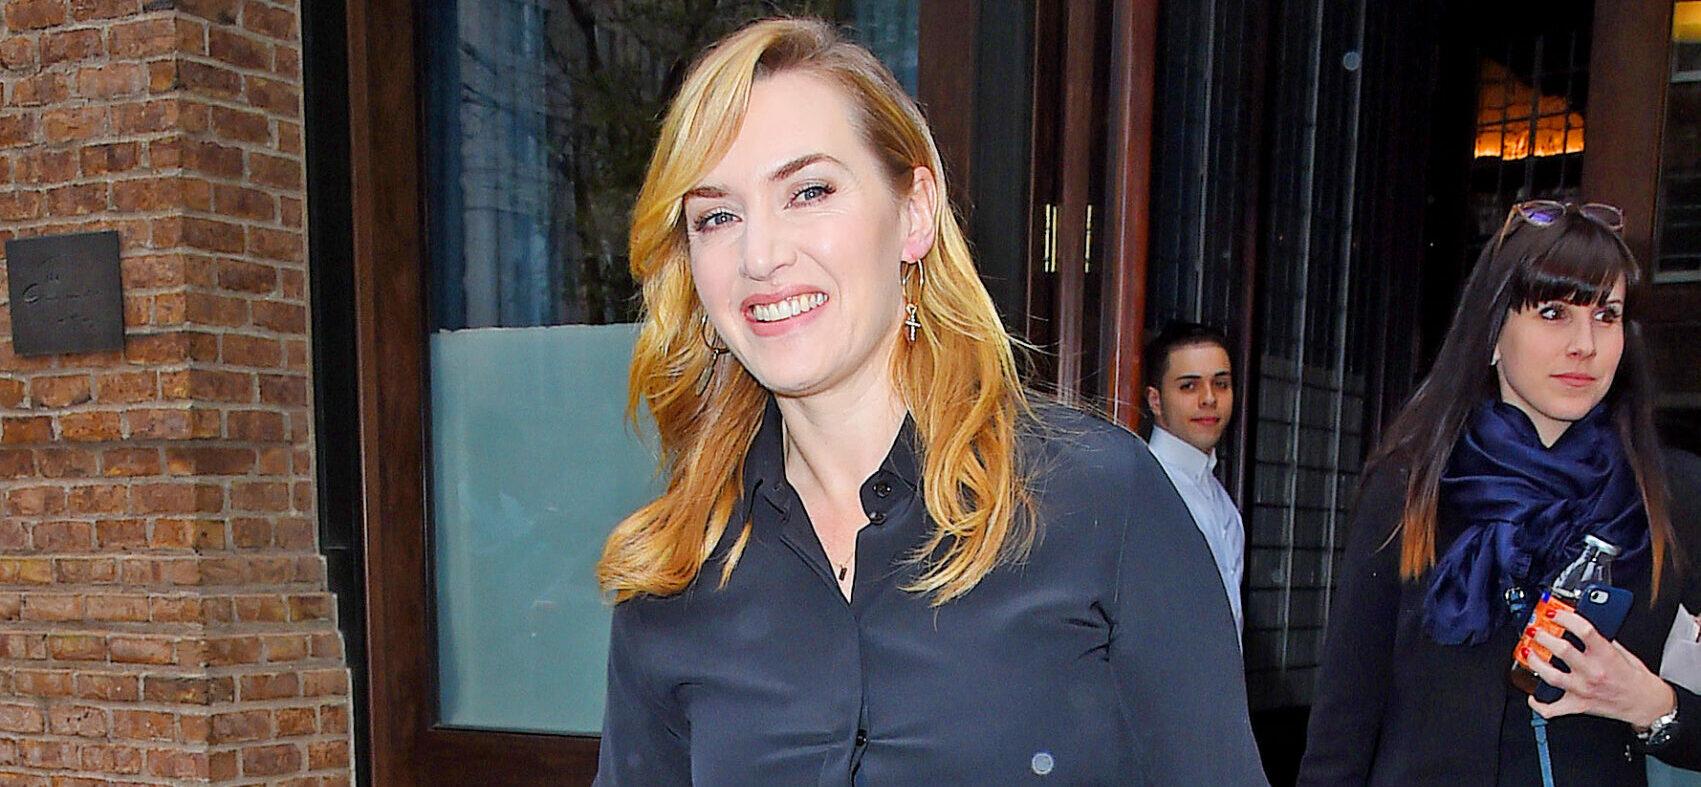 Kate Winslet Reveals She Was Told To Take On ‘Fat Girl’ Roles During Her Early Acting Days